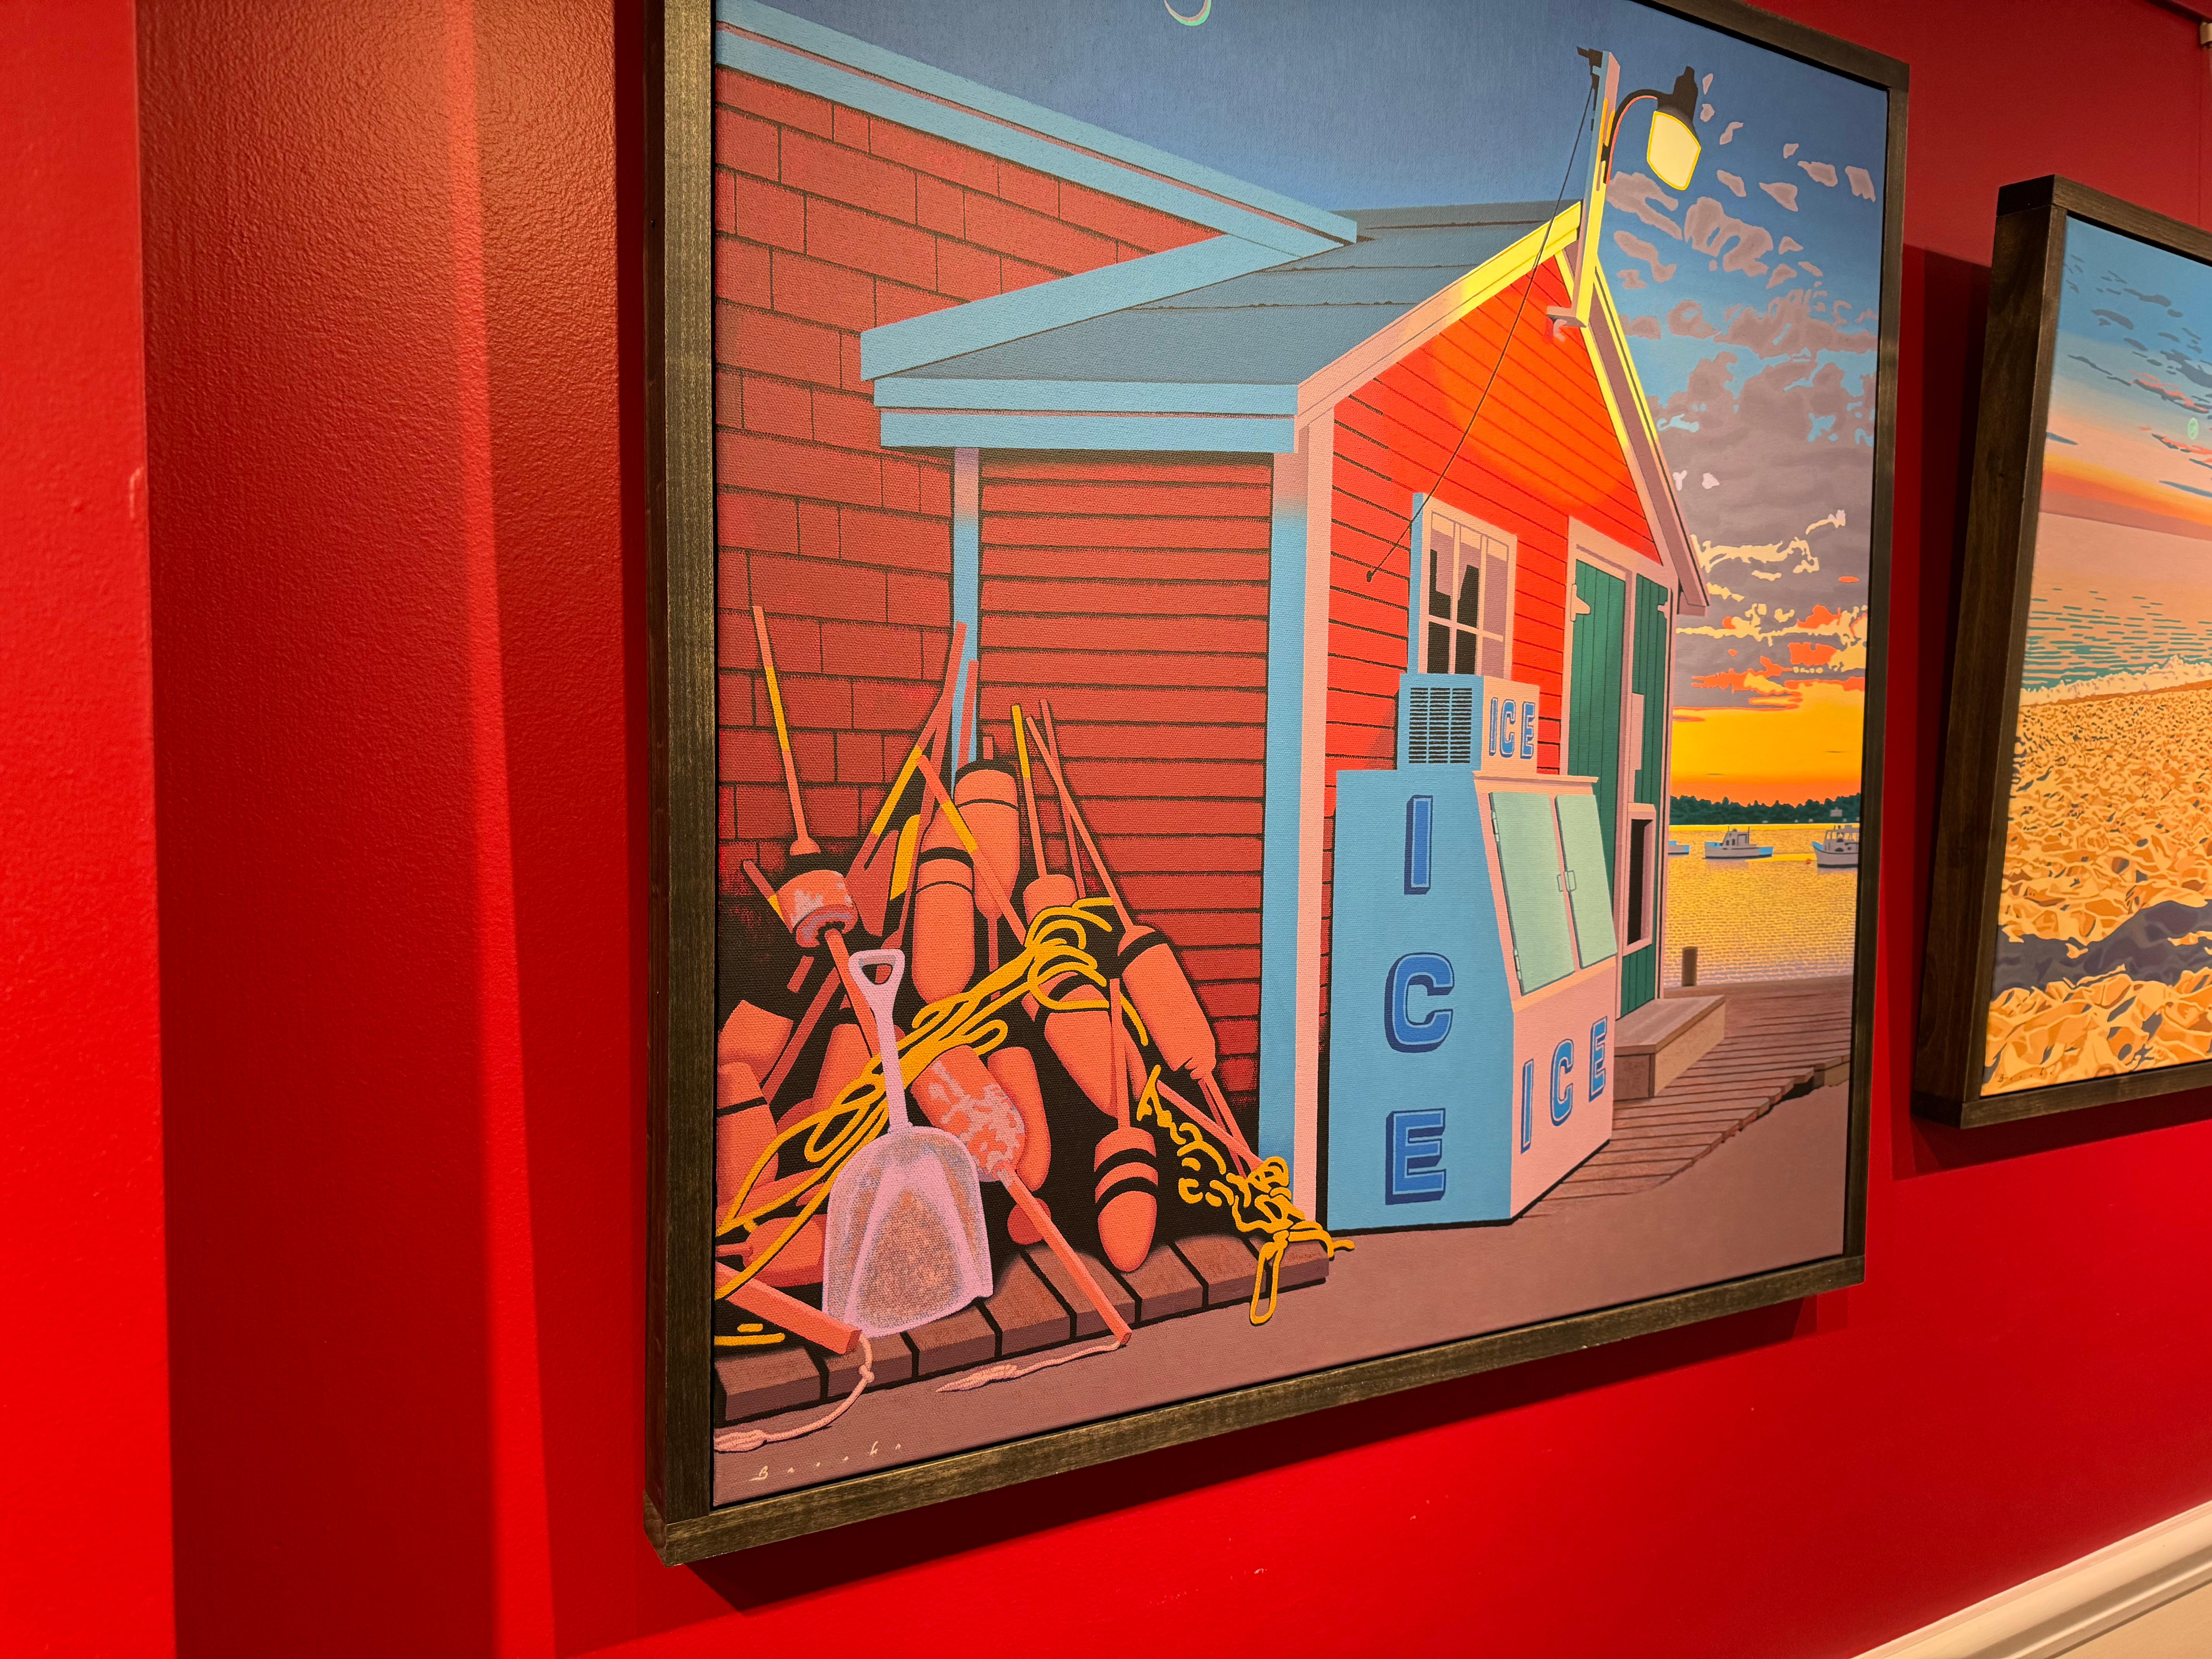 From an incandescent sunset on Long Island Sound to an iconic pop-kitsch ice storage bin at the neighborhood corner store, Rob Brooks offers us a visual journey from the real to surreal. Rob Brooks paintings depict a post-pop, illuminated cruise on